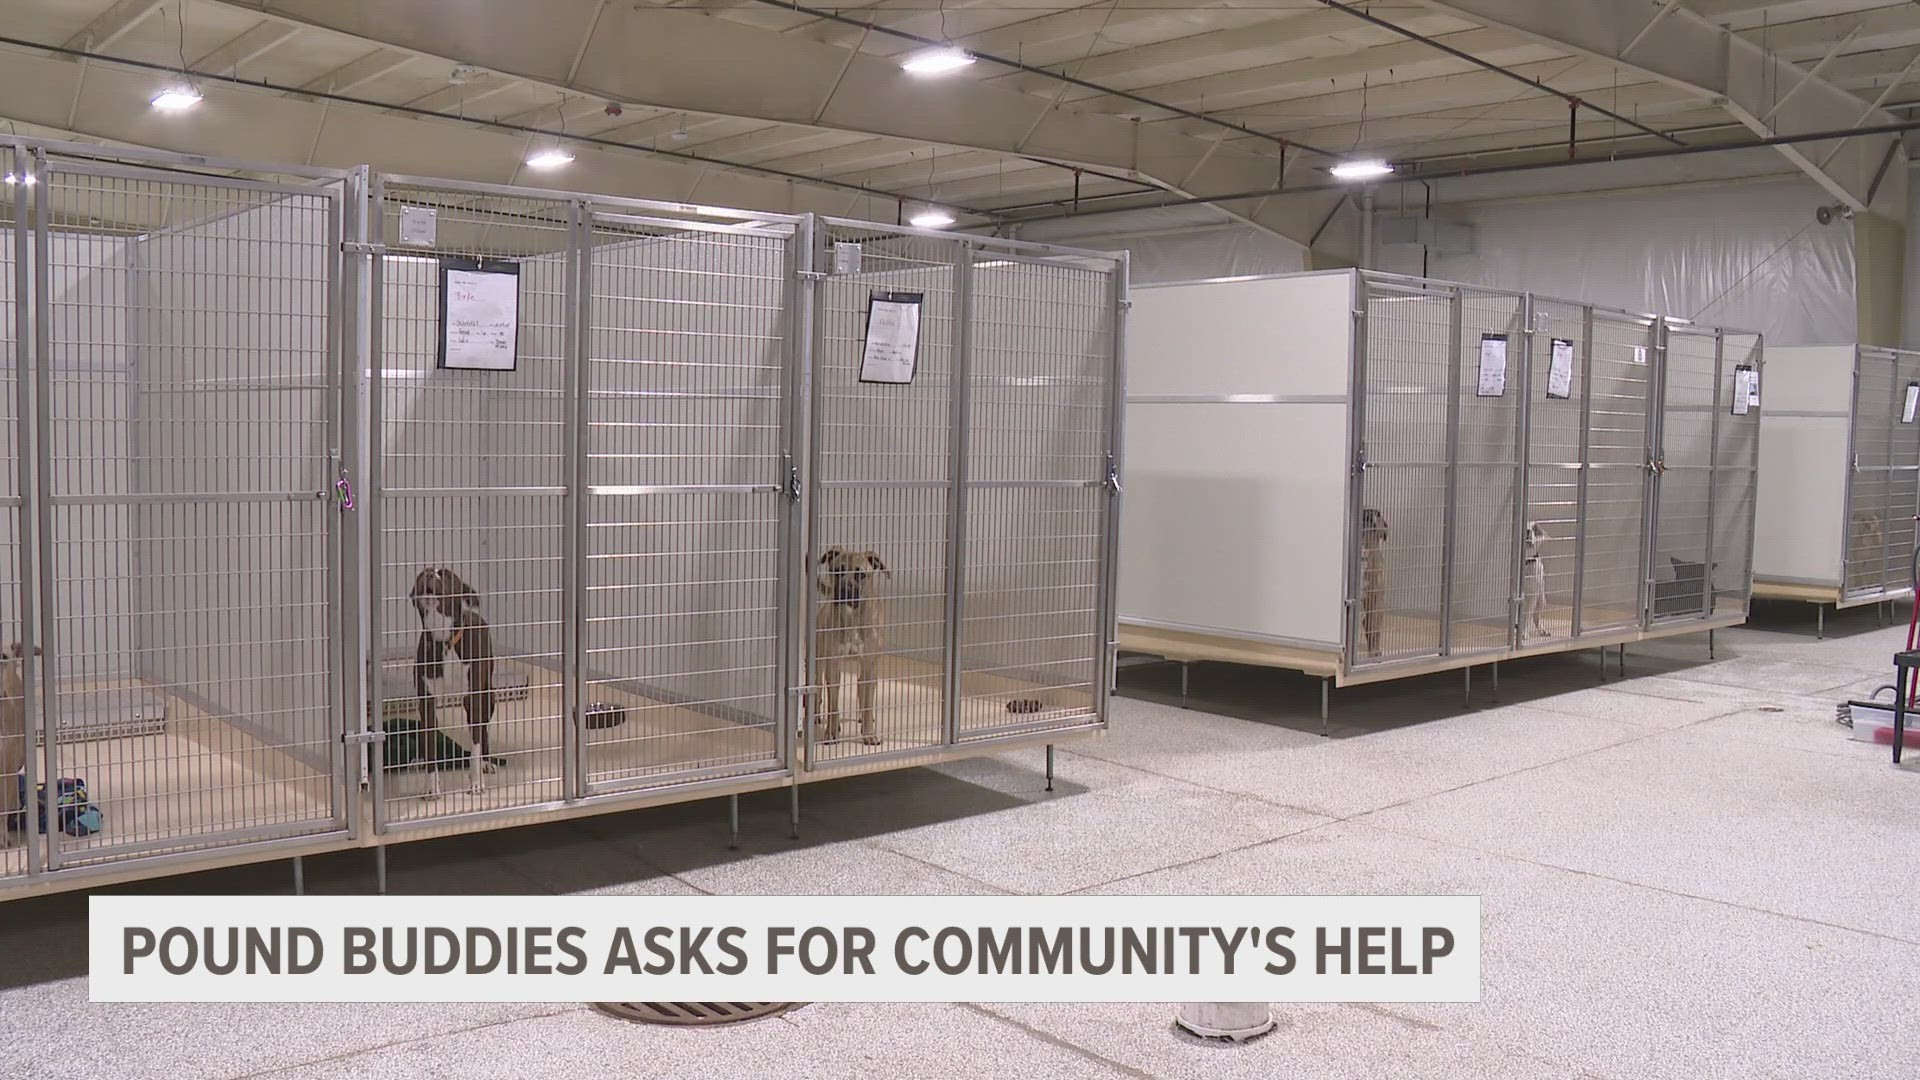 The shelter's executive director says they've received more than 100 animals in the first three months of the year.